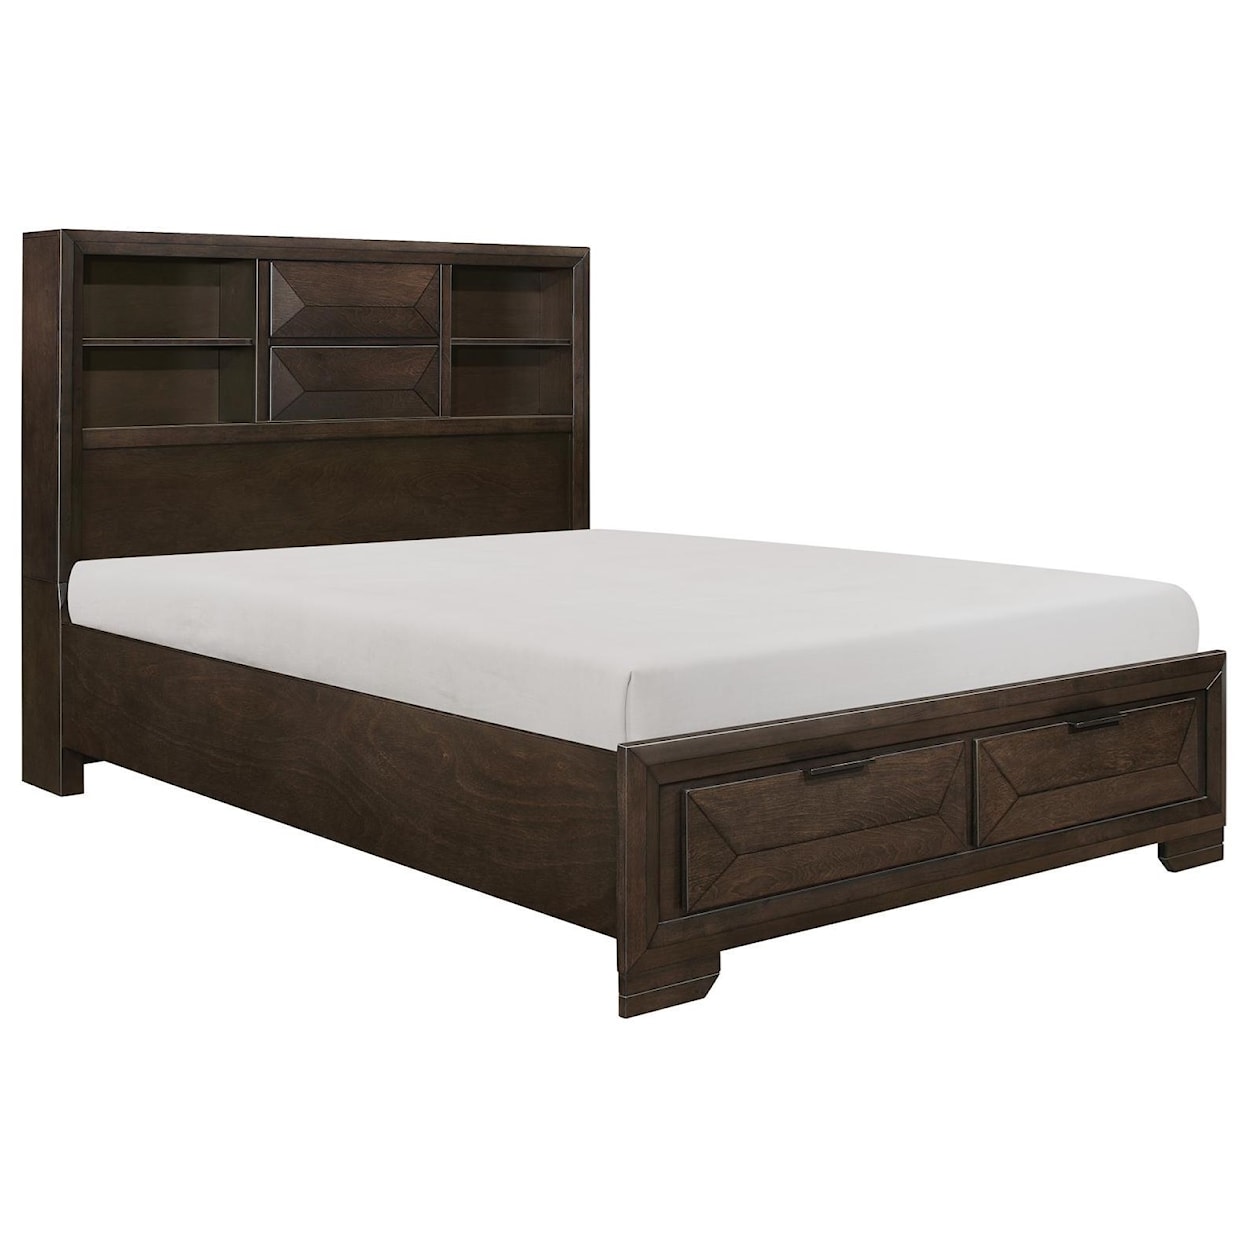 Homelegance Chesky California King Bookcase Bed